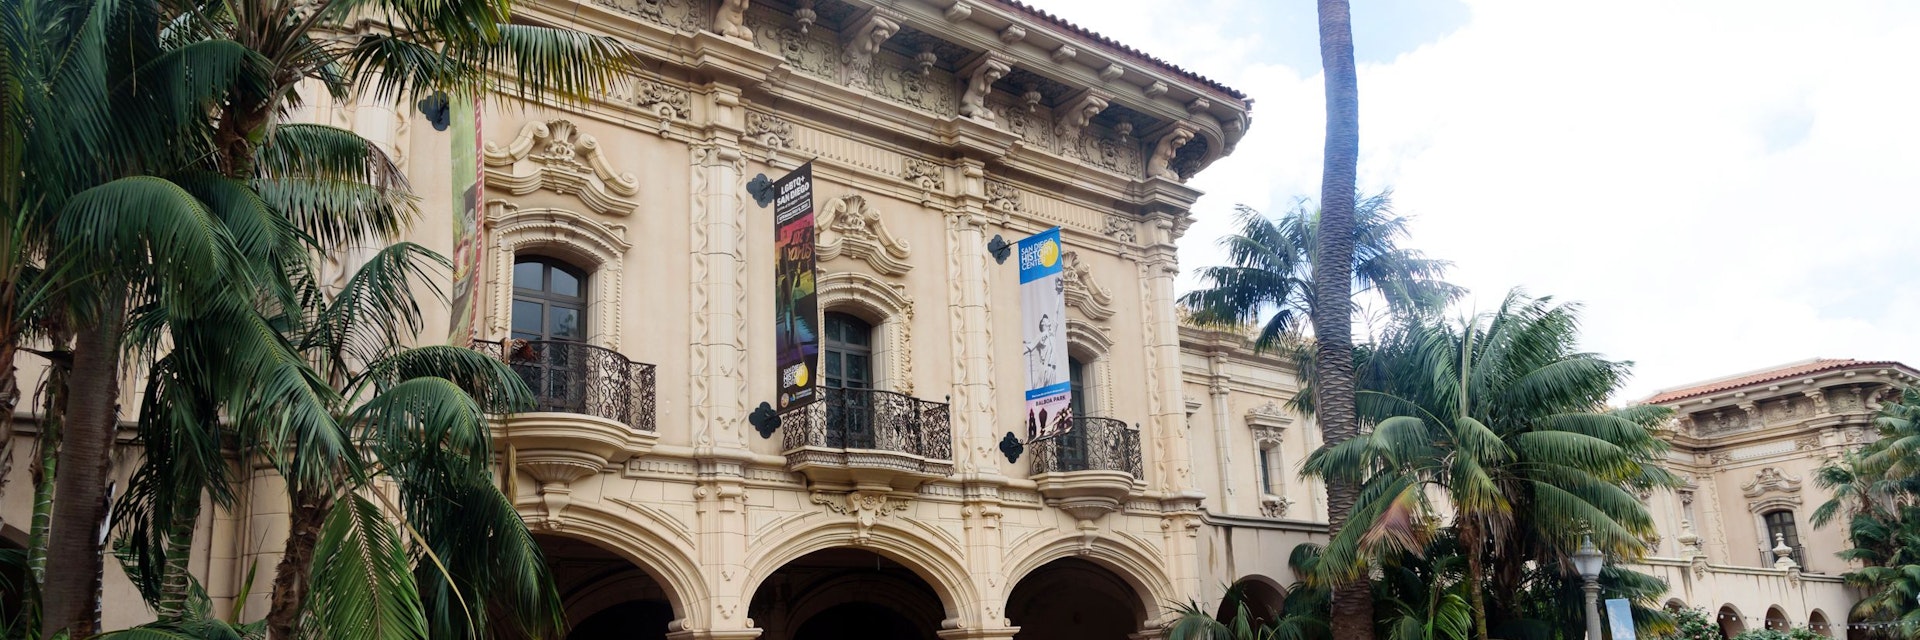 San Diego, CA / USA - December 25 2018: San Diego History Center building at Balboa Park; Shutterstock ID 1278624472; your: Bridget Brown; gl: 65050; netsuite: Online Editorial; full: POI Image Update
1278624472
arcade, arch, architecture, attraction, balboa, beautiful, beauty, building, california, casa, del, diego, editorial use only, exterior, fabulous, famous, history building, landmark, landscape, outdoor, park, prado, san, scenery, scenic, tourism, travel, tree, view